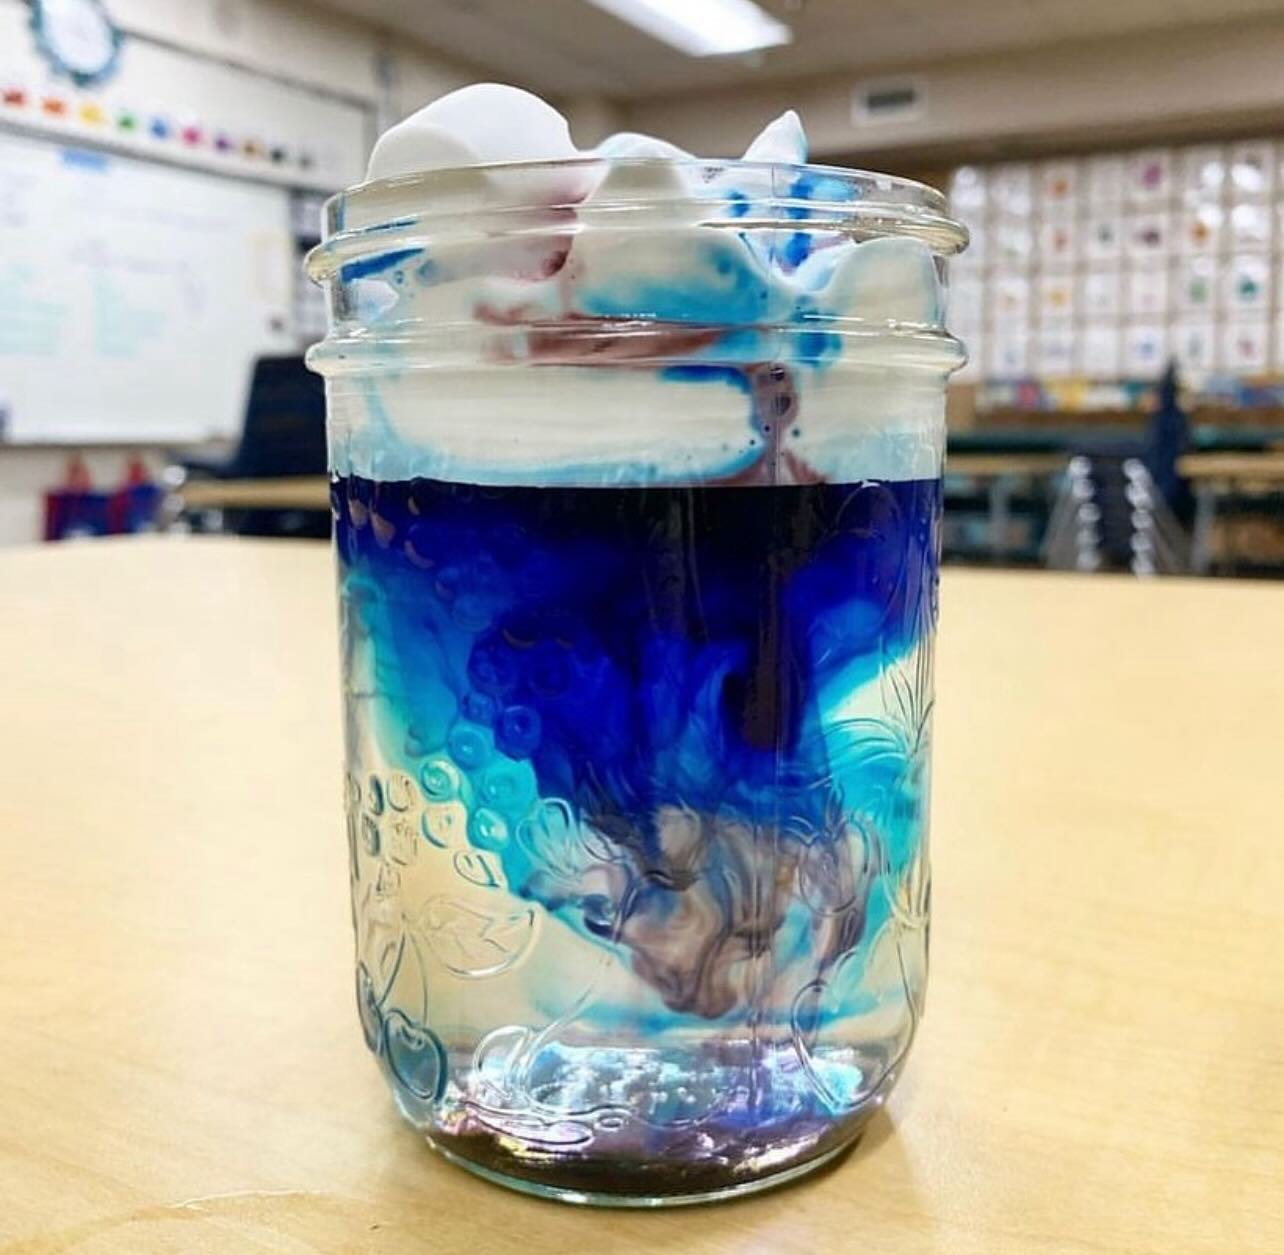 Rain in a jar science experiment 🌧 

Materials:
- jar 
- water for piping 
- pipette 
- shaving cream 
- food colouring 

How to:
- fill a jar of water 
- add shaving cream &ldquo;cloud&rdquo;
- add drops of food colouring 
- use a pipette to drop w